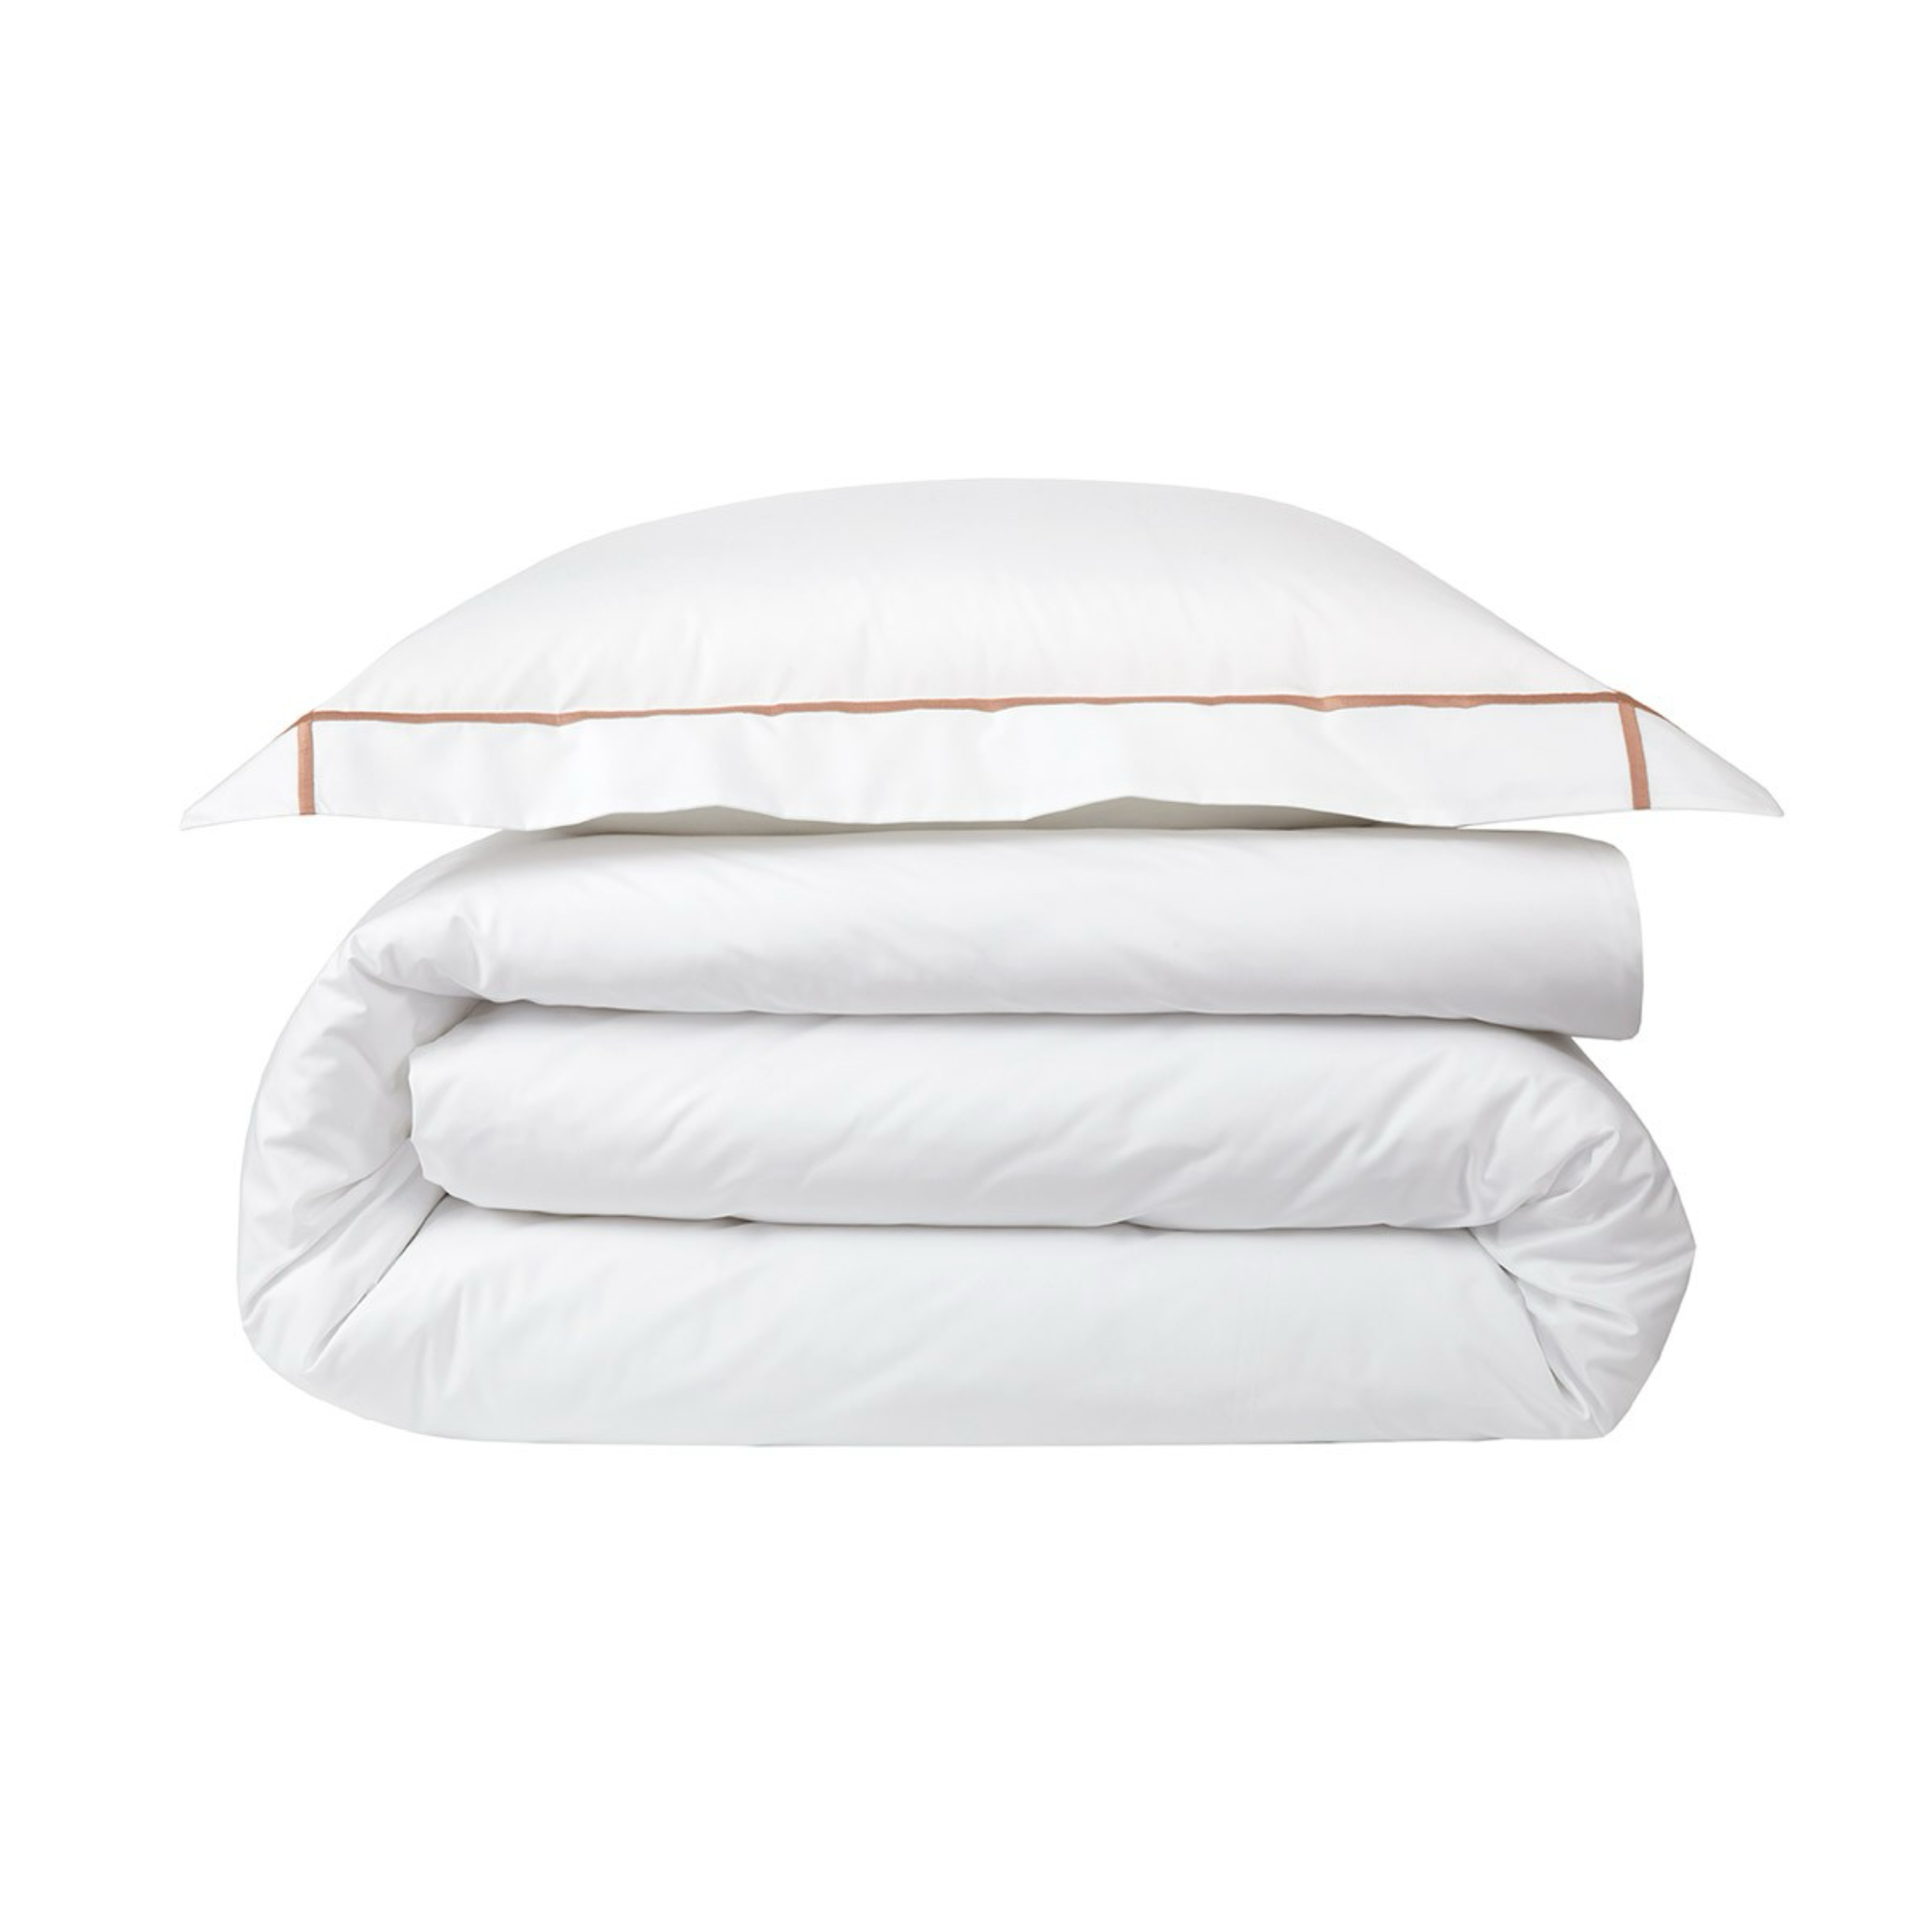 Sheet Set of Yves Delorme Athena Bedding in Sienna Color